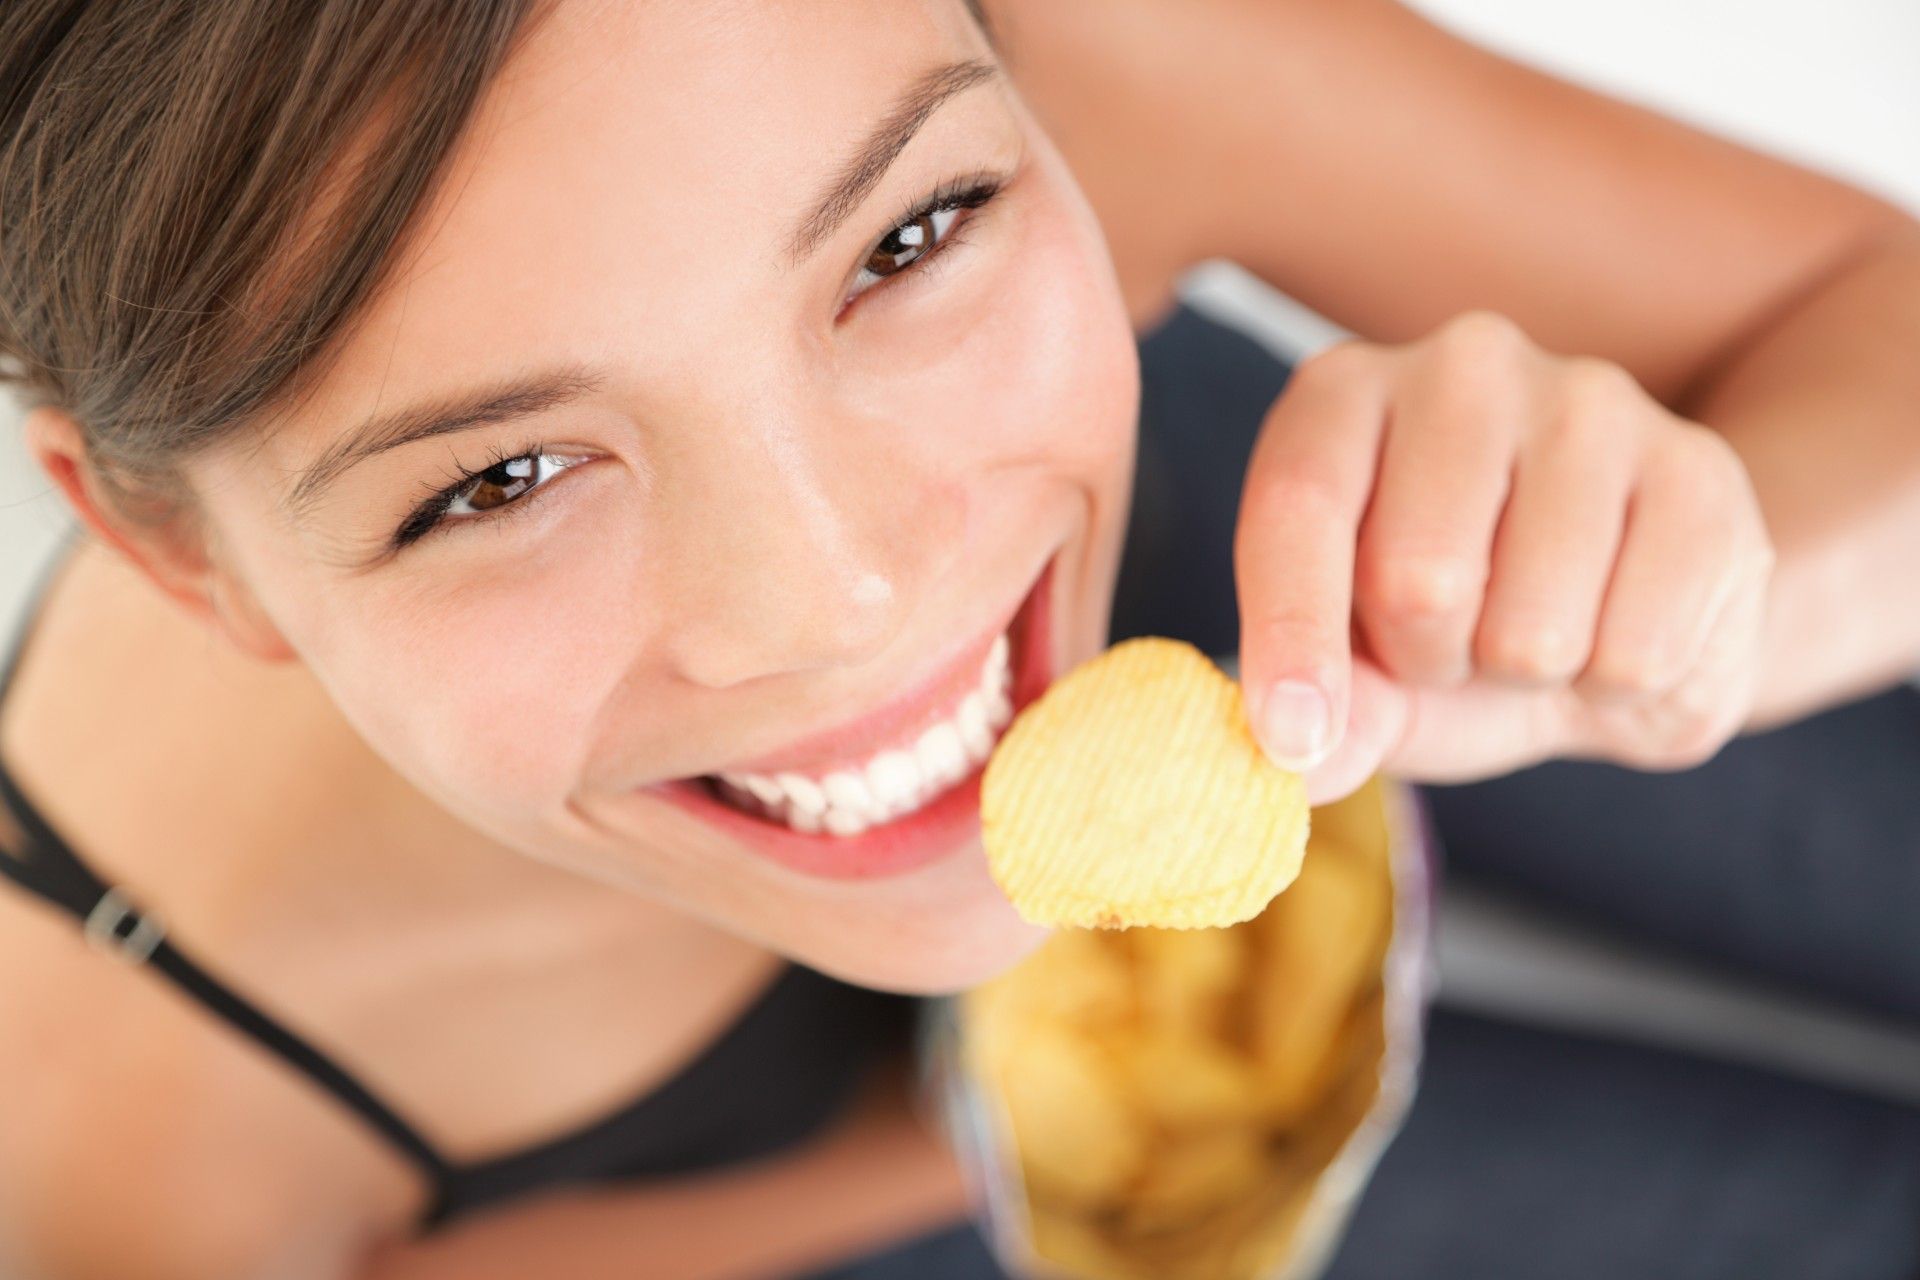 A woman looks up at the camera while eating chips - artificial flavors